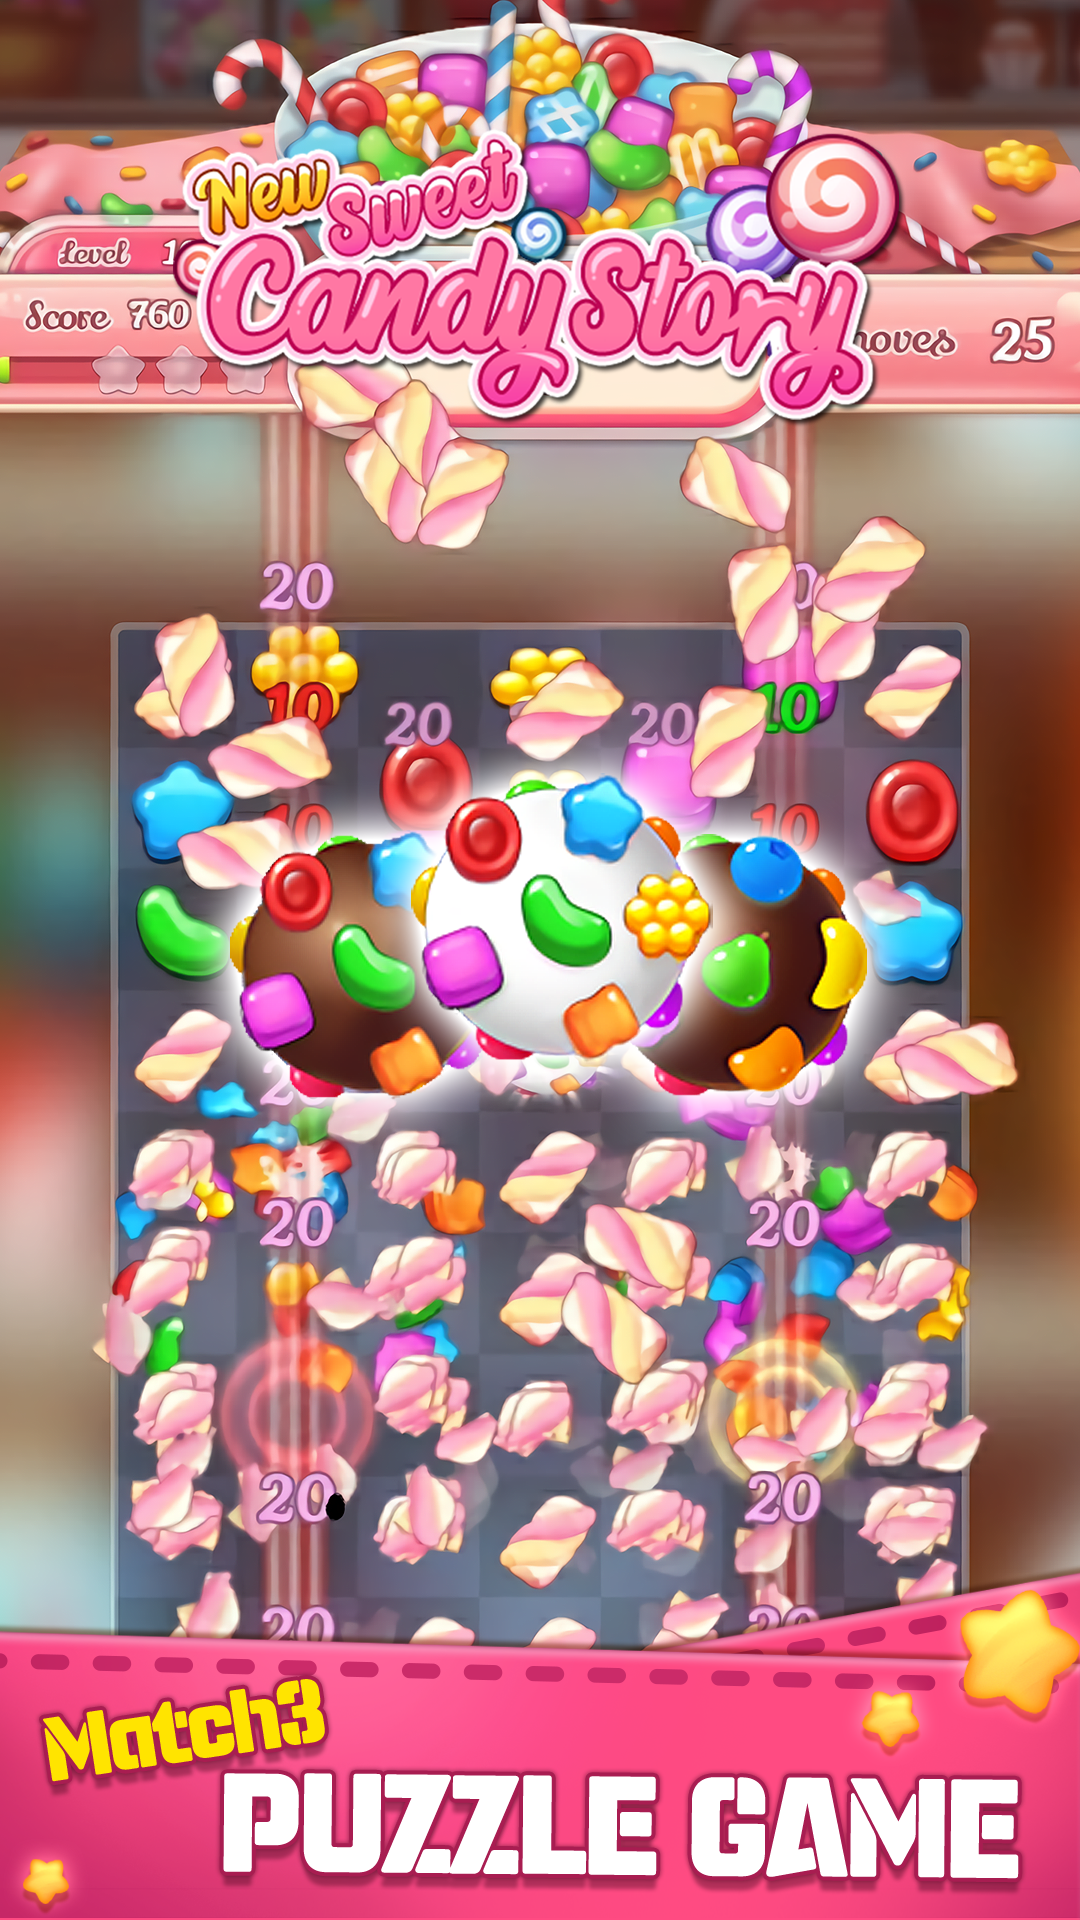 Screenshot 1 of New Sweet Candy Story 2020 : P 3.2.0